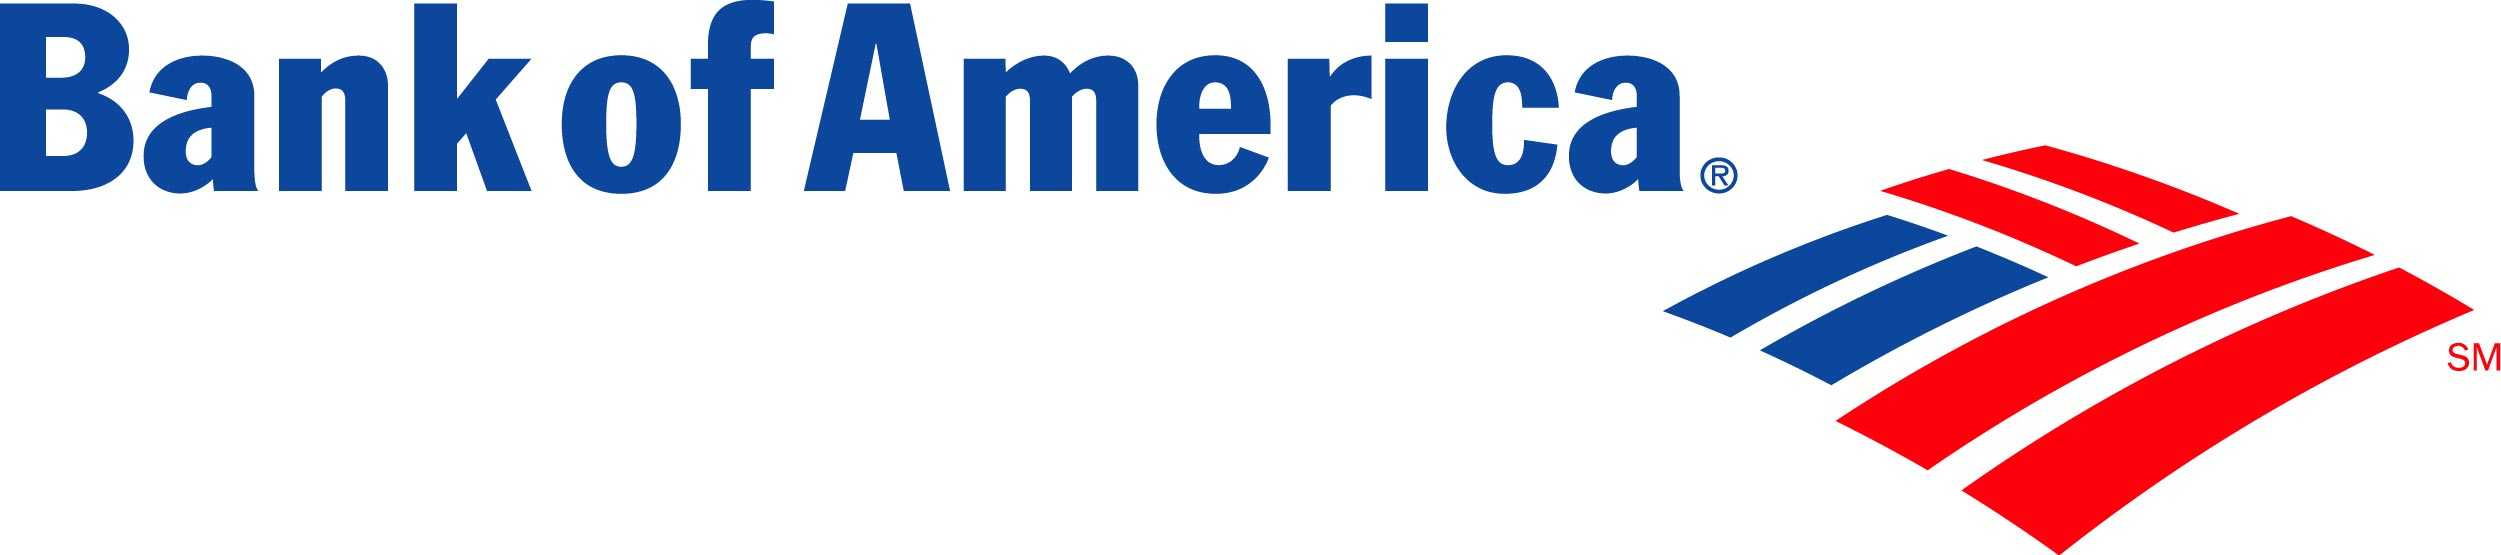 Old Bank of America Logo - Bank of America Short Sale Agent - Los Angeles